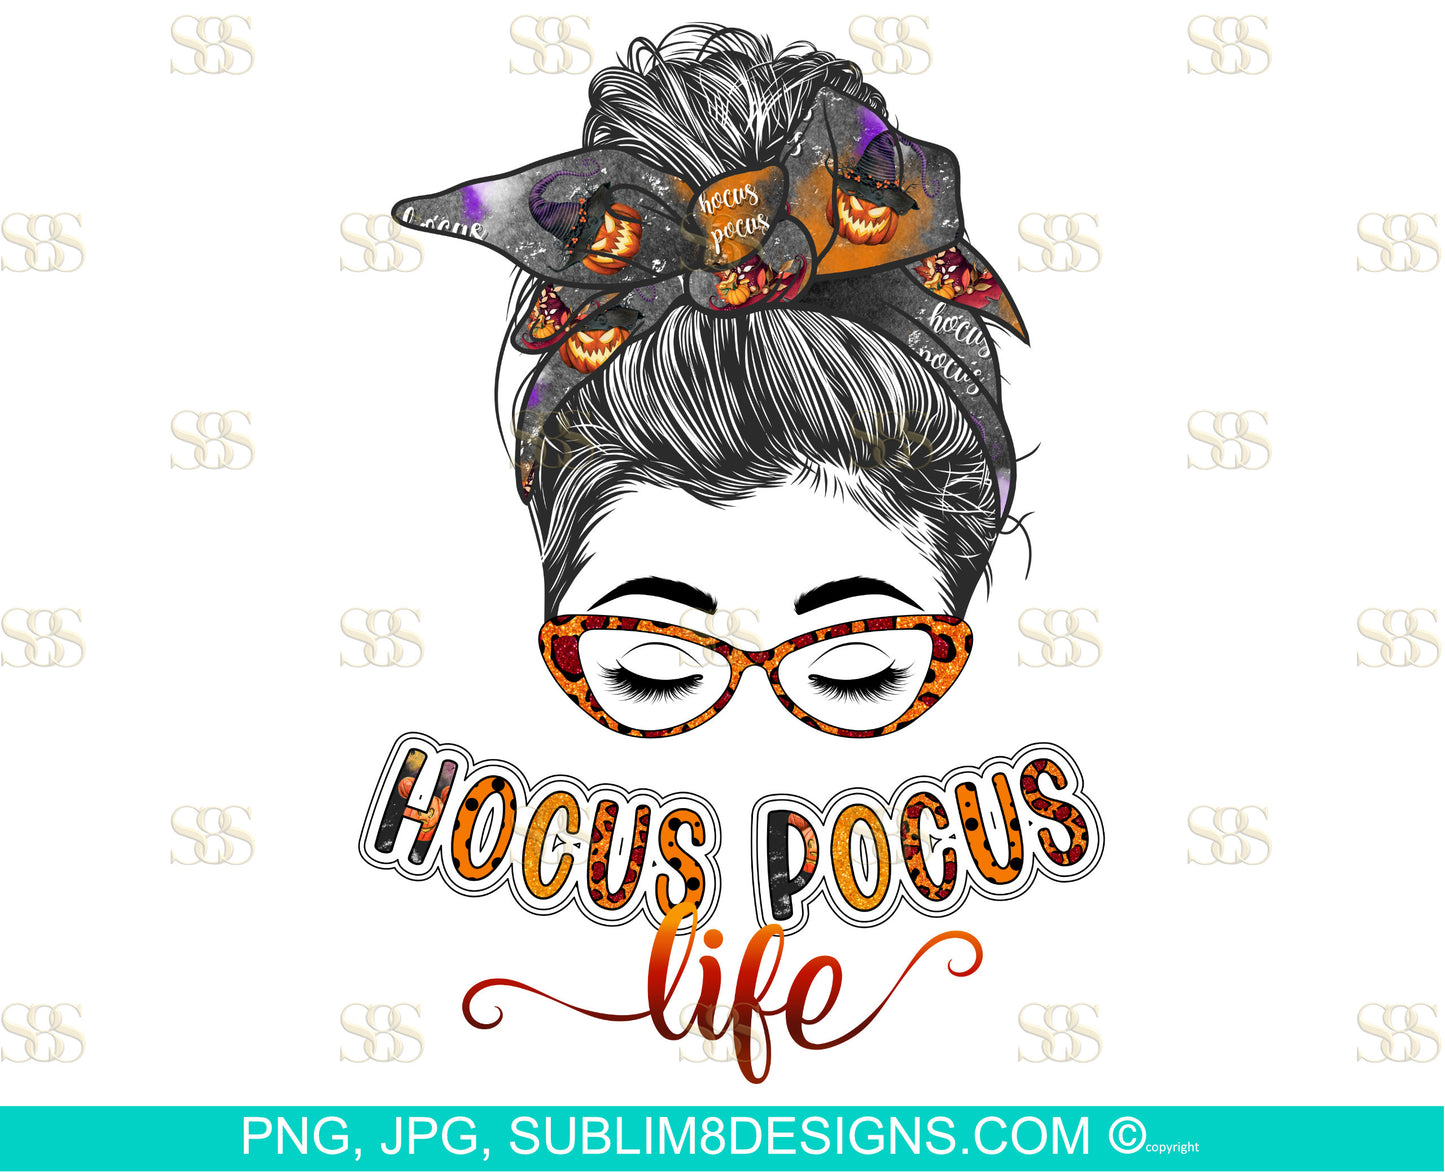 Hocus Pocus Life PNG and JPG ONLY